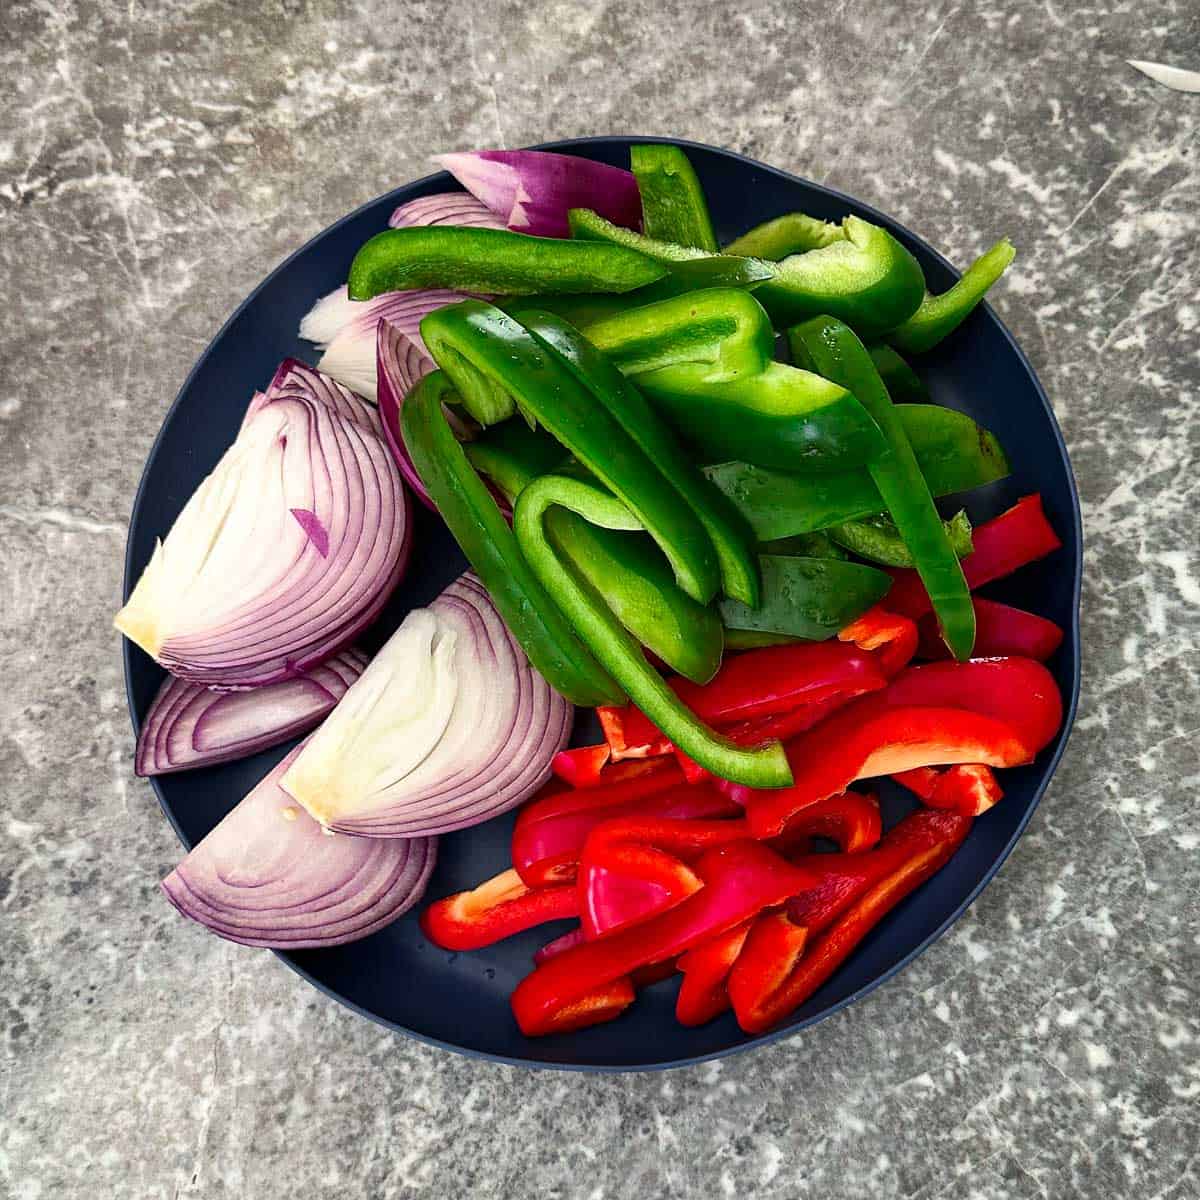 Chopped Veggies on a platter: green bell peppers, red bell peppers, red onion.